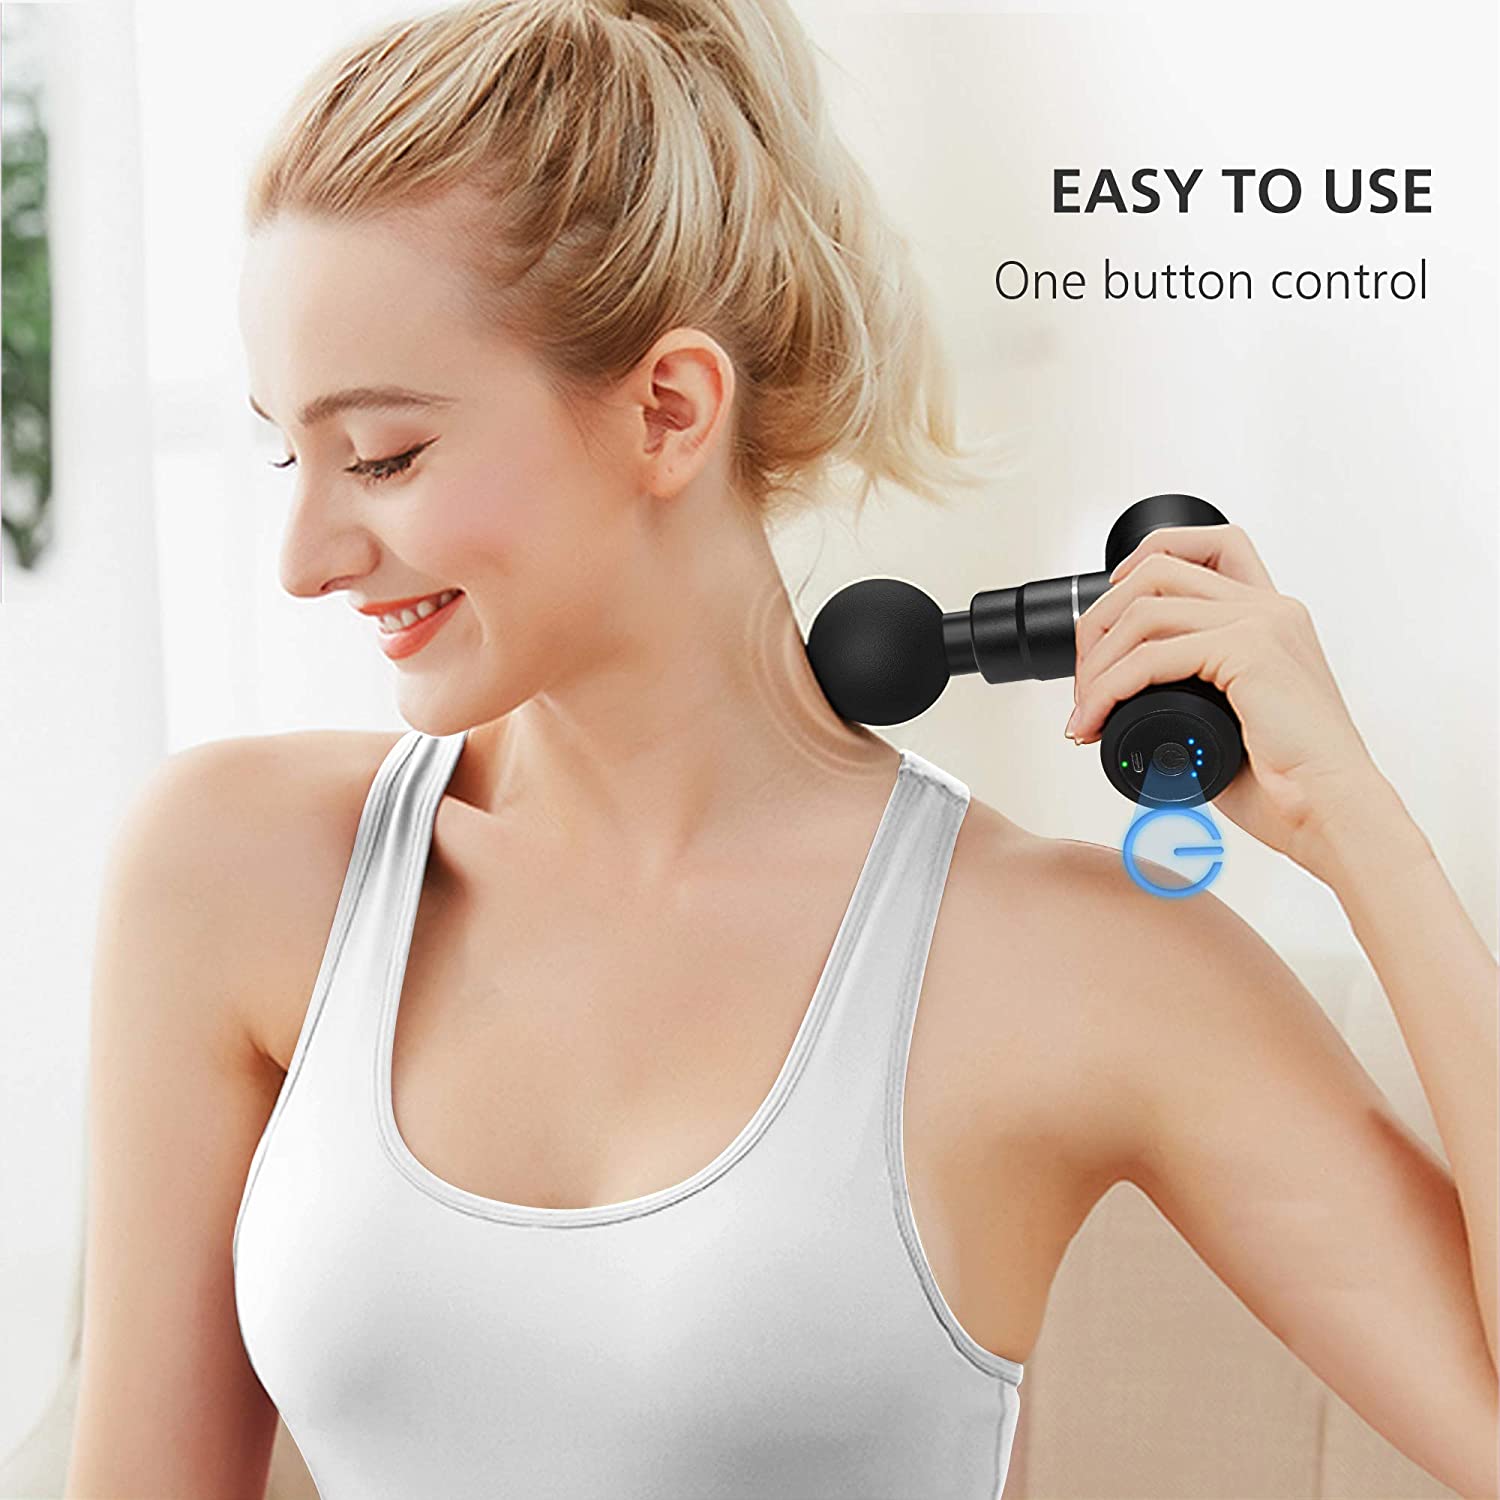 Deep Tissue Neck Massager - Fast Neck Pain Relief, Unique Muscle Stripping  Action, Unique Design Targets Small Neck Muscles. Ideal for Occipital